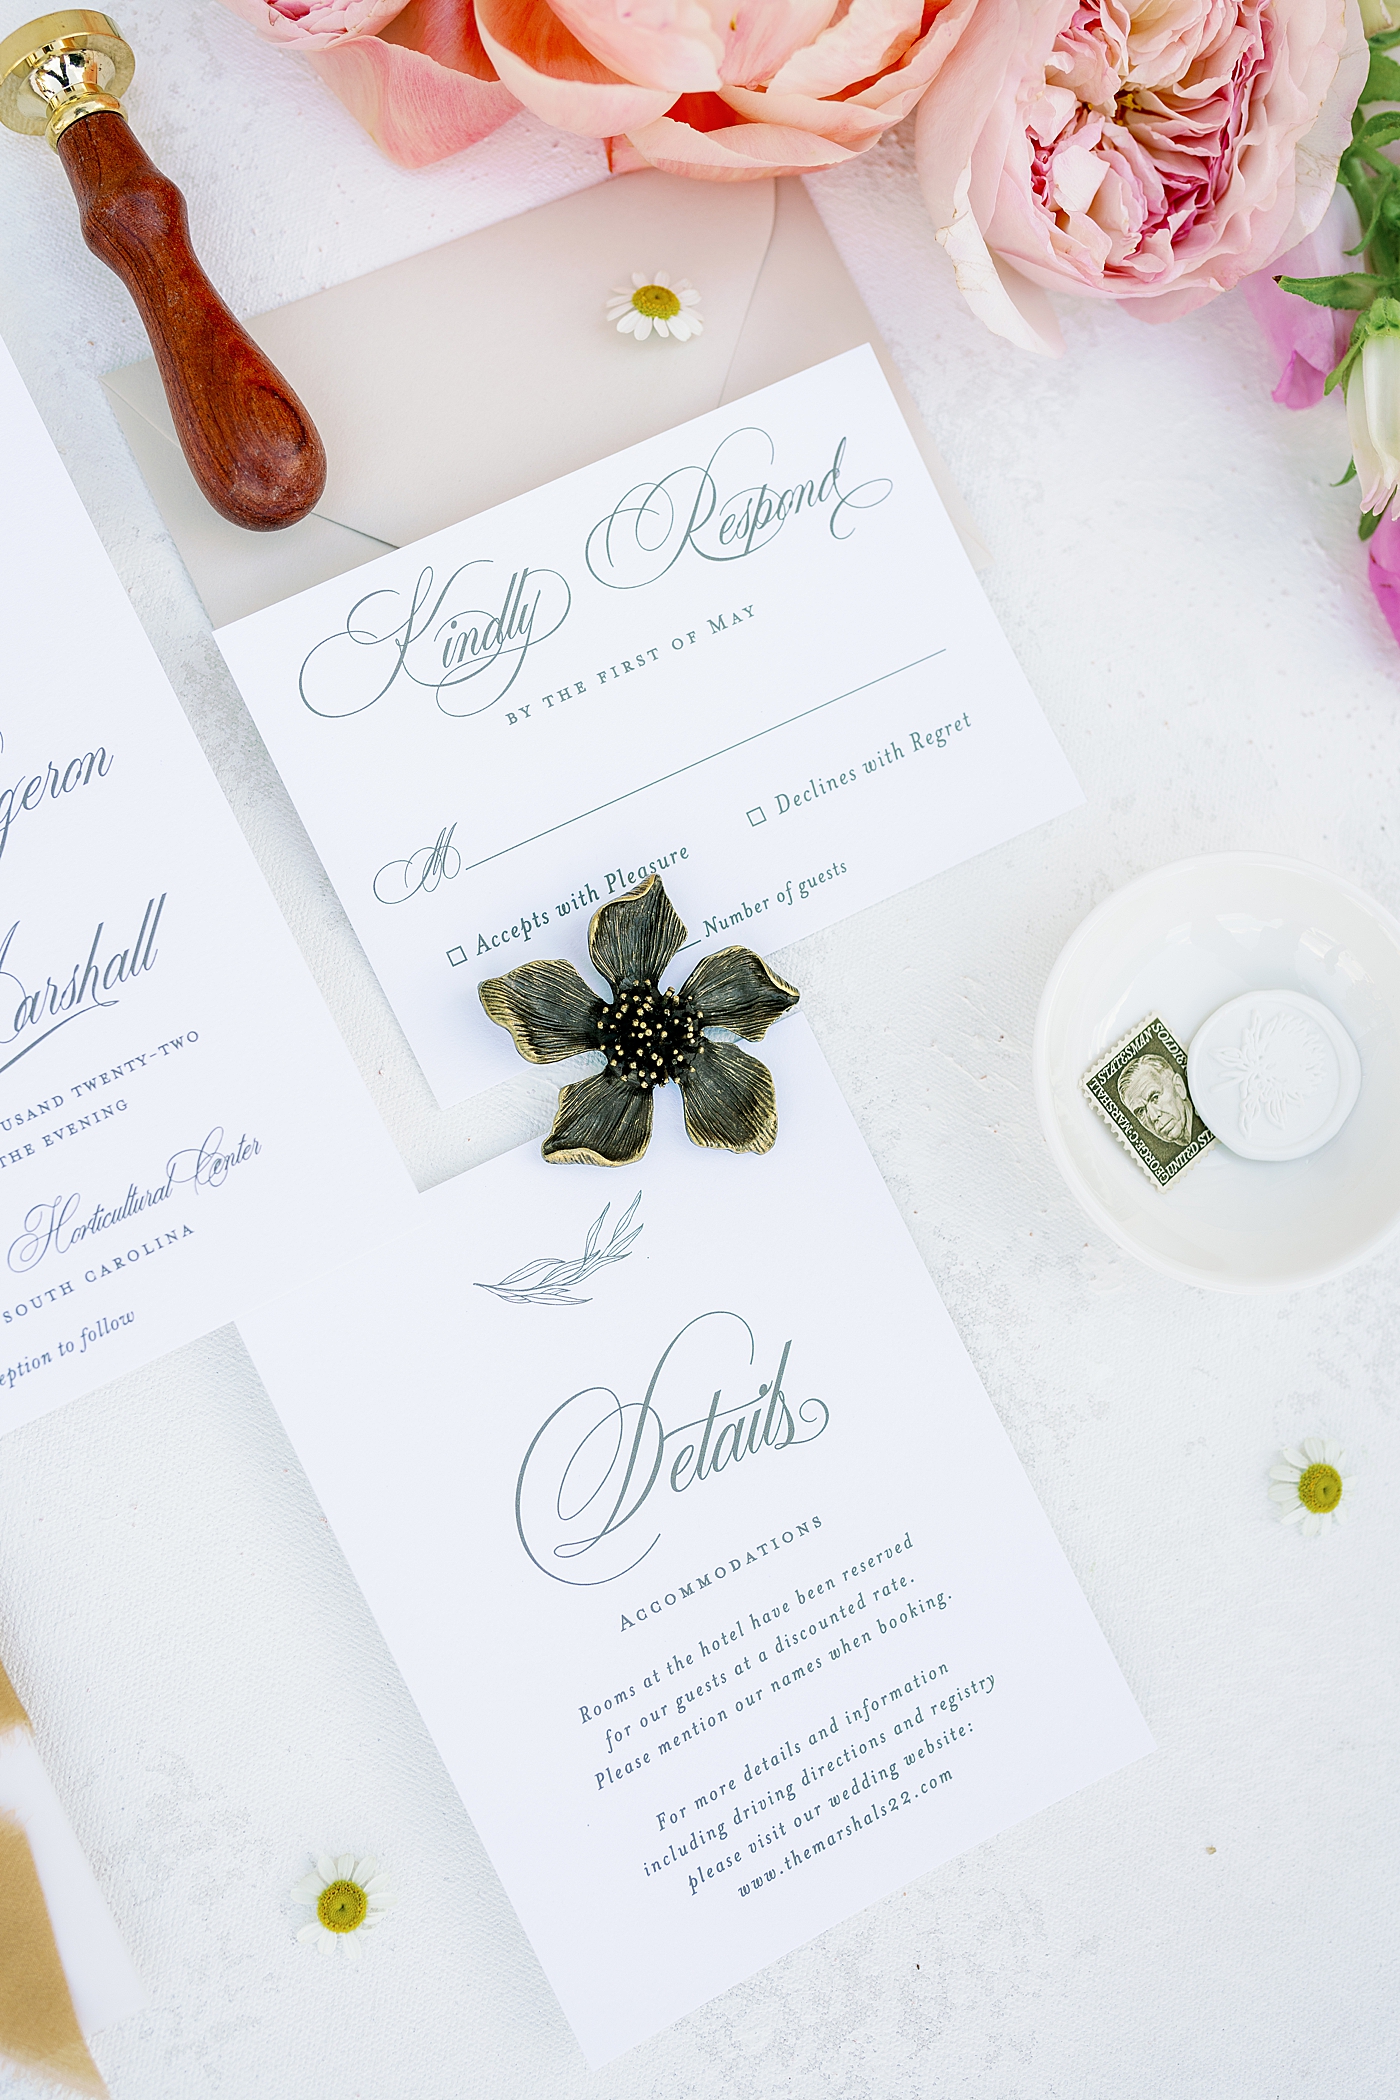 Wedding invitation styled with flowers and a ring dish | Photo by Annie Laura Photo